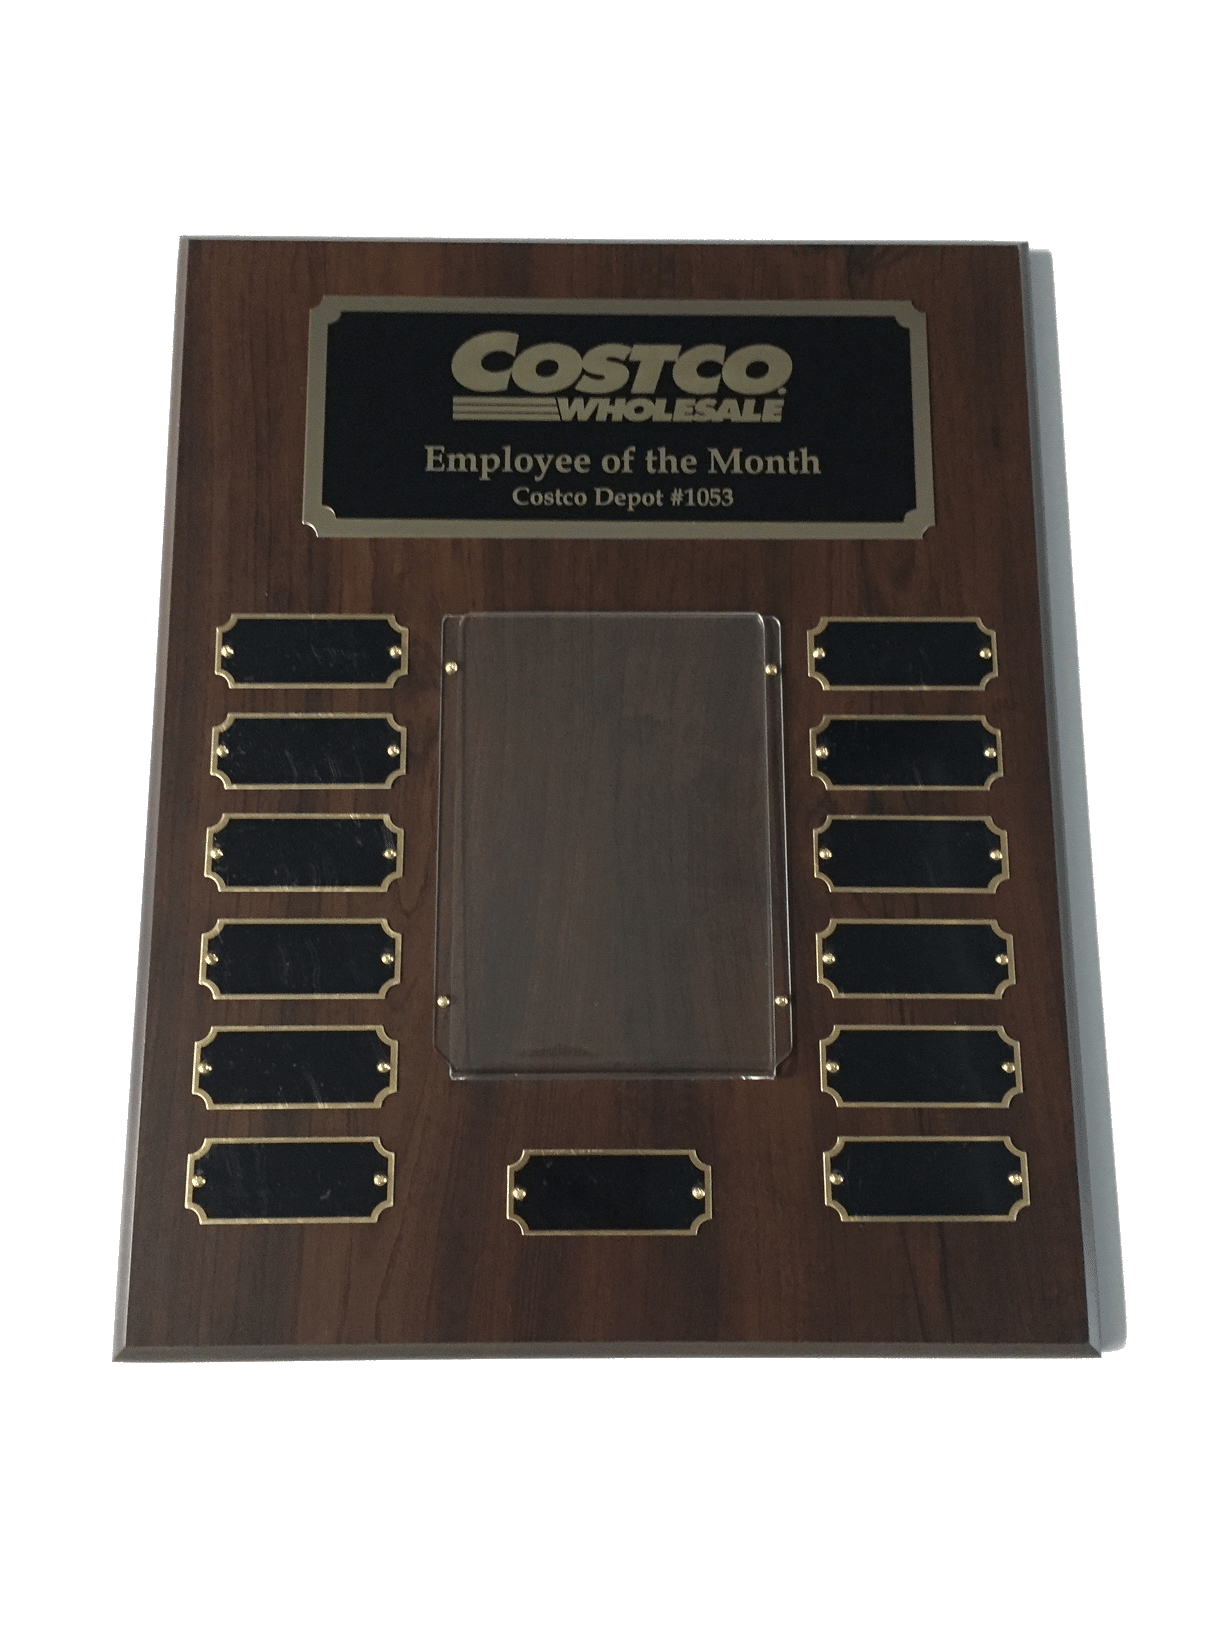 Costco employee of the month plaque